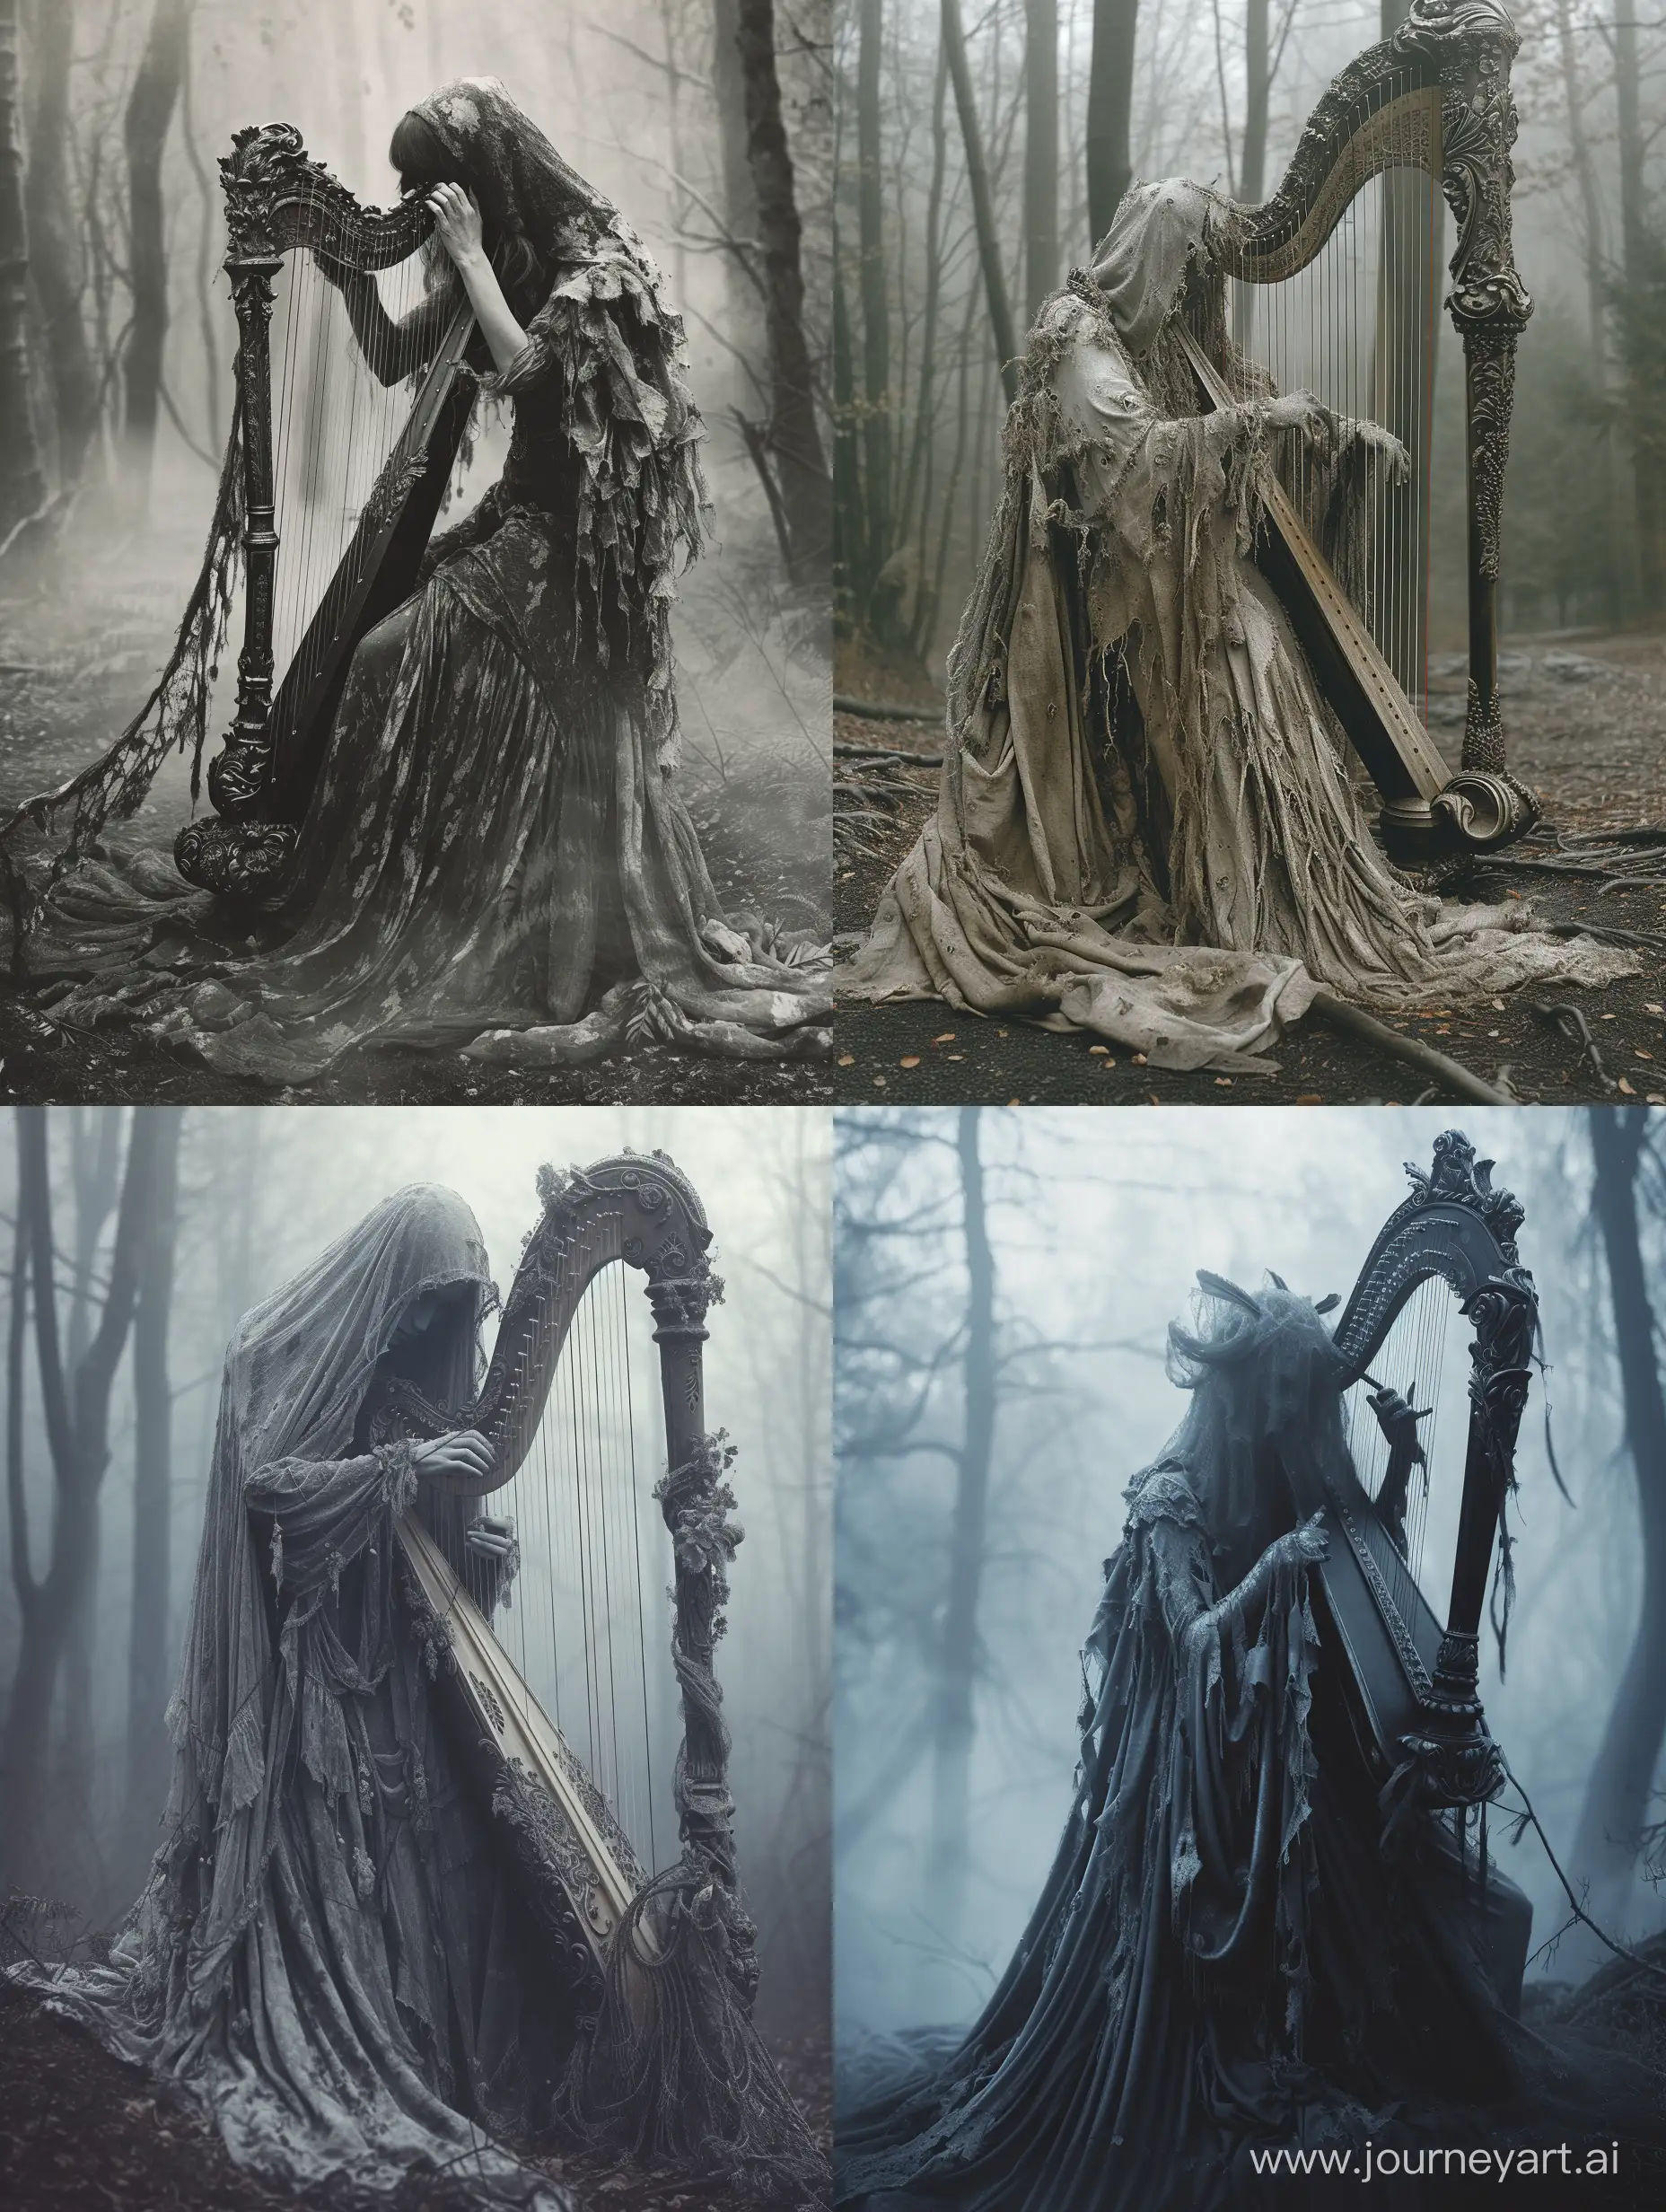 Enchanting-Harp-Melody-by-Ghostly-Spectral-Woman-in-Misty-Forest